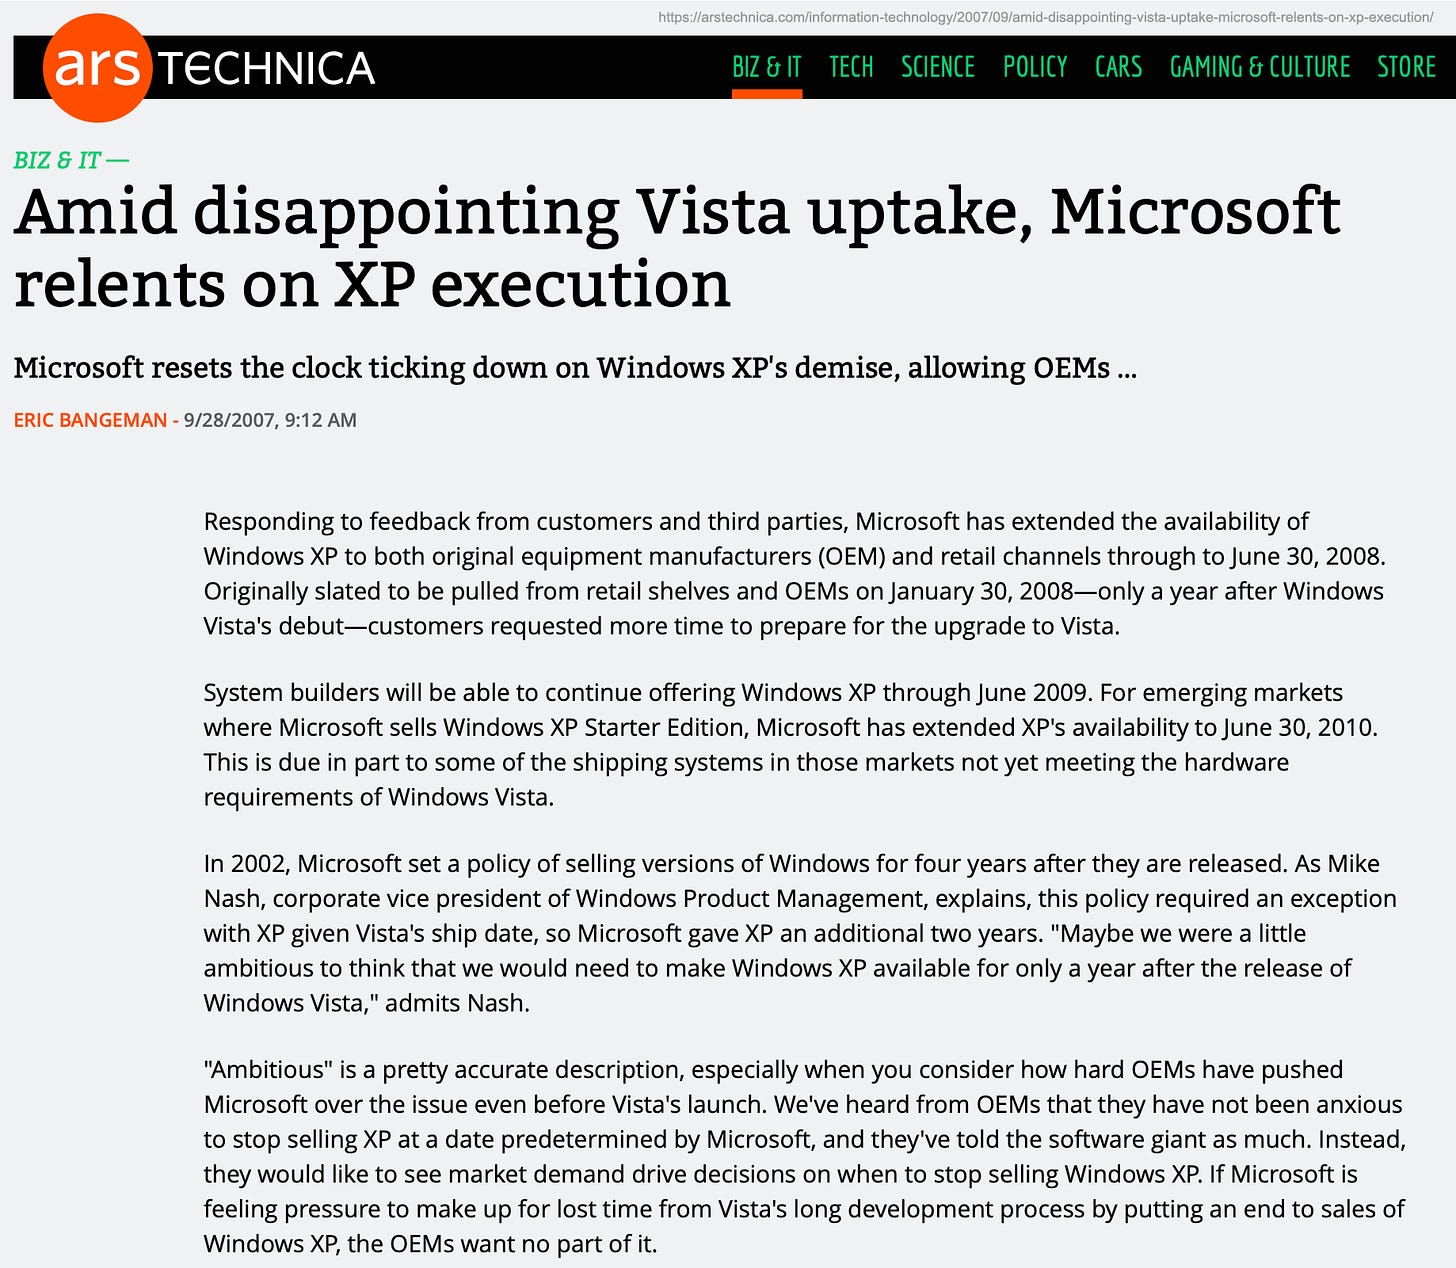 Amid disappointing Vista uptake, Microsoft relents on XP execution Microsoft resets the clock ticking down on Windows XP's demise, allowing OEMs... ERIC BANGEMAN - 9/28/2007, 9:12 AM Responding to feedback from customers and third parties, Microsoft has extended the availability of Windows XP to both original equipment manufacturers (OEM) and retail channels through to June 30, 2008. Originally slated to be pulled from retail shelves and OEMs on January 30, 2008-only a year after Windows Vista's debut--customers requested more time to prepare for the upgrade to Vista. System builders will be able to continue offering Windows XP through June 2009. For emerging markets where Microsoft sells Windows XP Starter Edition, Microsoft has extended XP's availability to June 30, 2010. This is due in part to some of the shipping systems in those markets not yet meeting the hardware requirements of Windows Vista. In 2002, Microsoft set a policy of selling versions of Windows for four years after they are released. As Mike Nash, corporate vice president of Windows Product Management, explains, this policy required an exception with XP given Vista's ship date, so Microsoft gave XP an additional two years. "Maybe we were a little ambitious to think that we would need to make Windows XP available for only a year after the release of Windows Vista," admits Nash. "Ambitious" is a pretty accurate description, especially when you consider how hard OEMs have pushed Microsoft over the issue even before Vista's launch. We've heard from OEMs that they have not been anxious to stop selling XP at a date predetermined by Microsoft, and they've told the software giant as much. Instead, they would like to see market demand drive decisions on when to stop selling Windows XP. If Microsoft is feeling pressure to make up for lost time from Vista's long development process by putting an end to sales of Windows XP, the OEMs want no part of it.